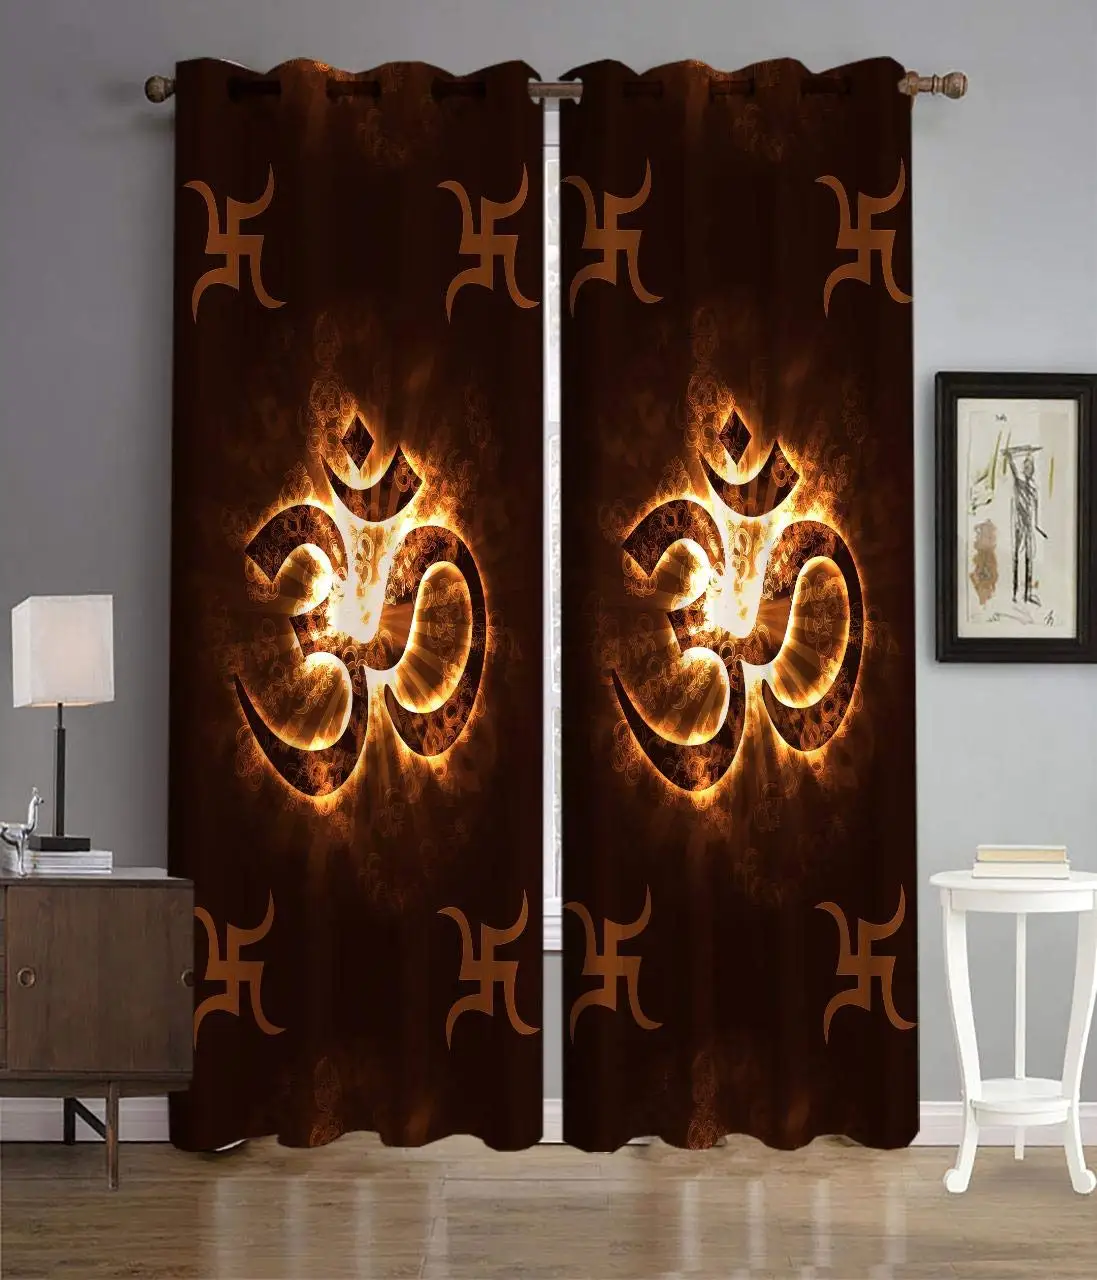 

3D God Digital Printed Home Furnishing Custom Curtains for Indian Festival Bedroom Living Room Window Curtains 2 Panels